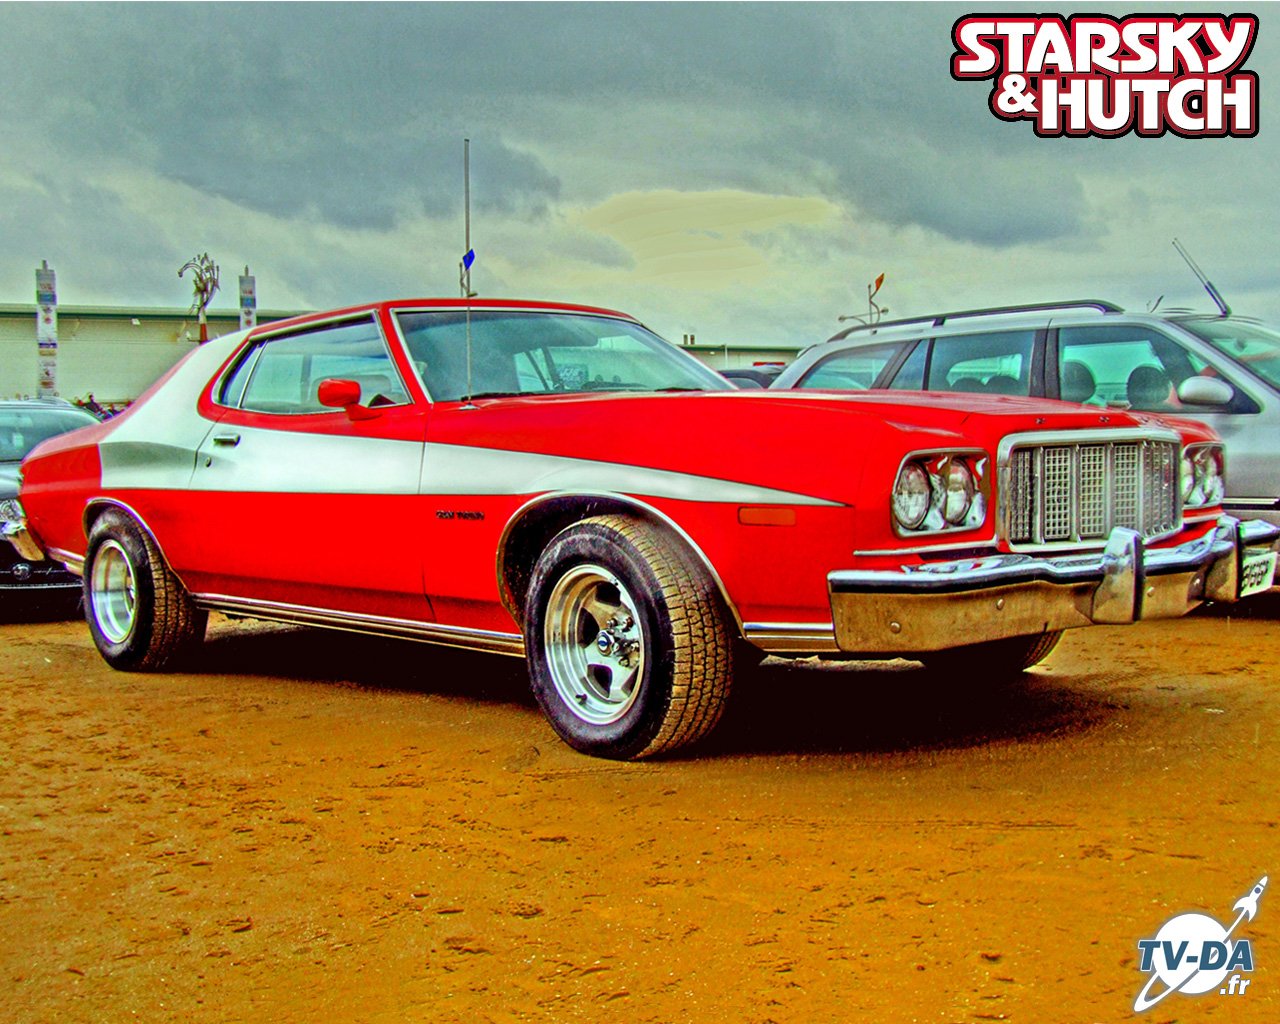 Starsky And Hutch HD Wallpaper Background Image